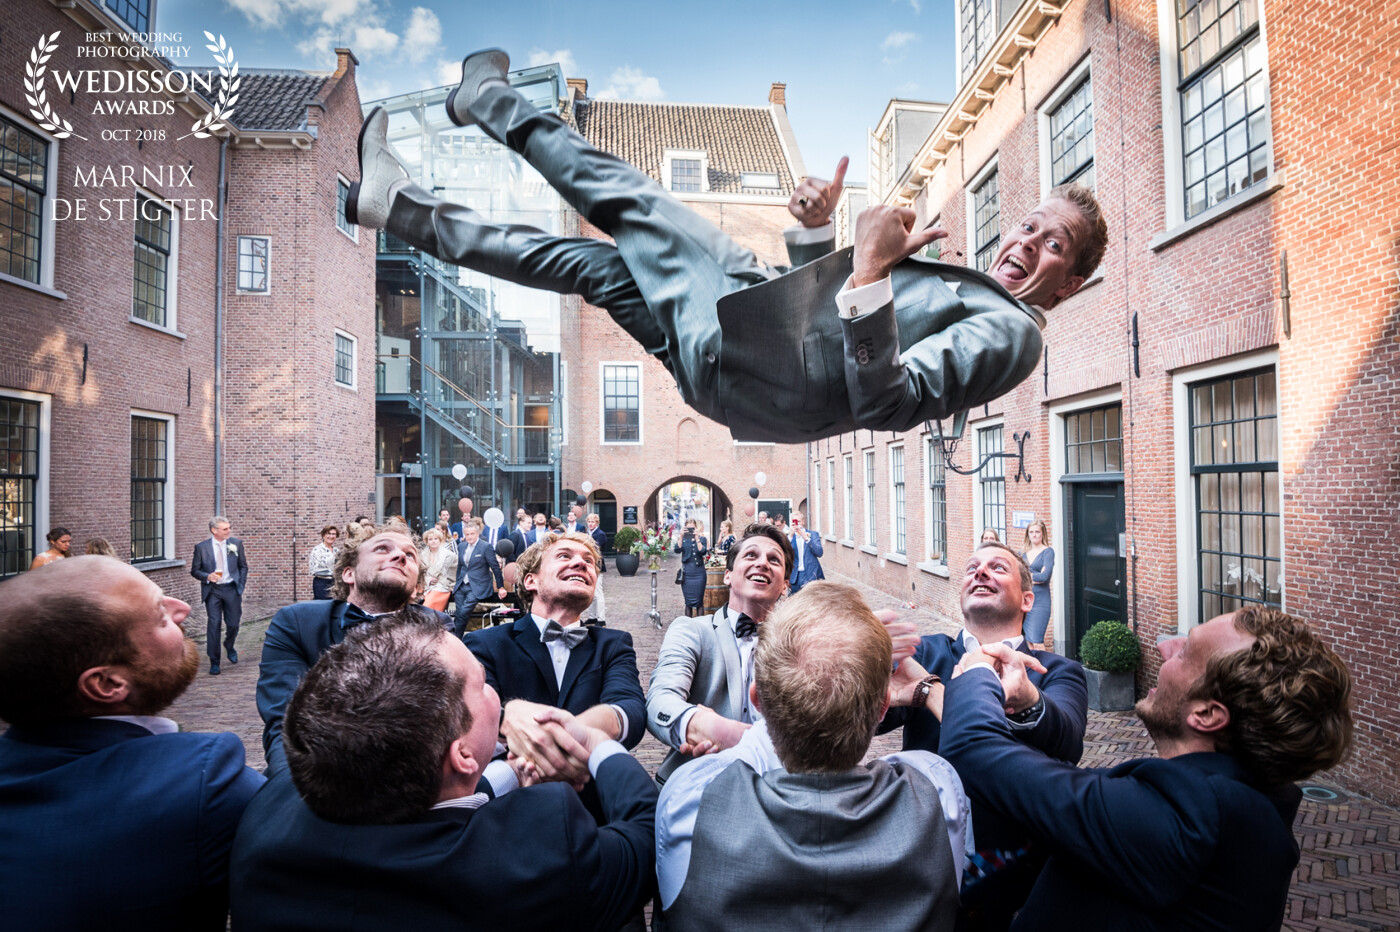 Without any seeming effort these groomsmen made the groom fly really high. I had never seen a groom be this relaxed and enjoy this as much as he did. Love the expression on all the men's faces!